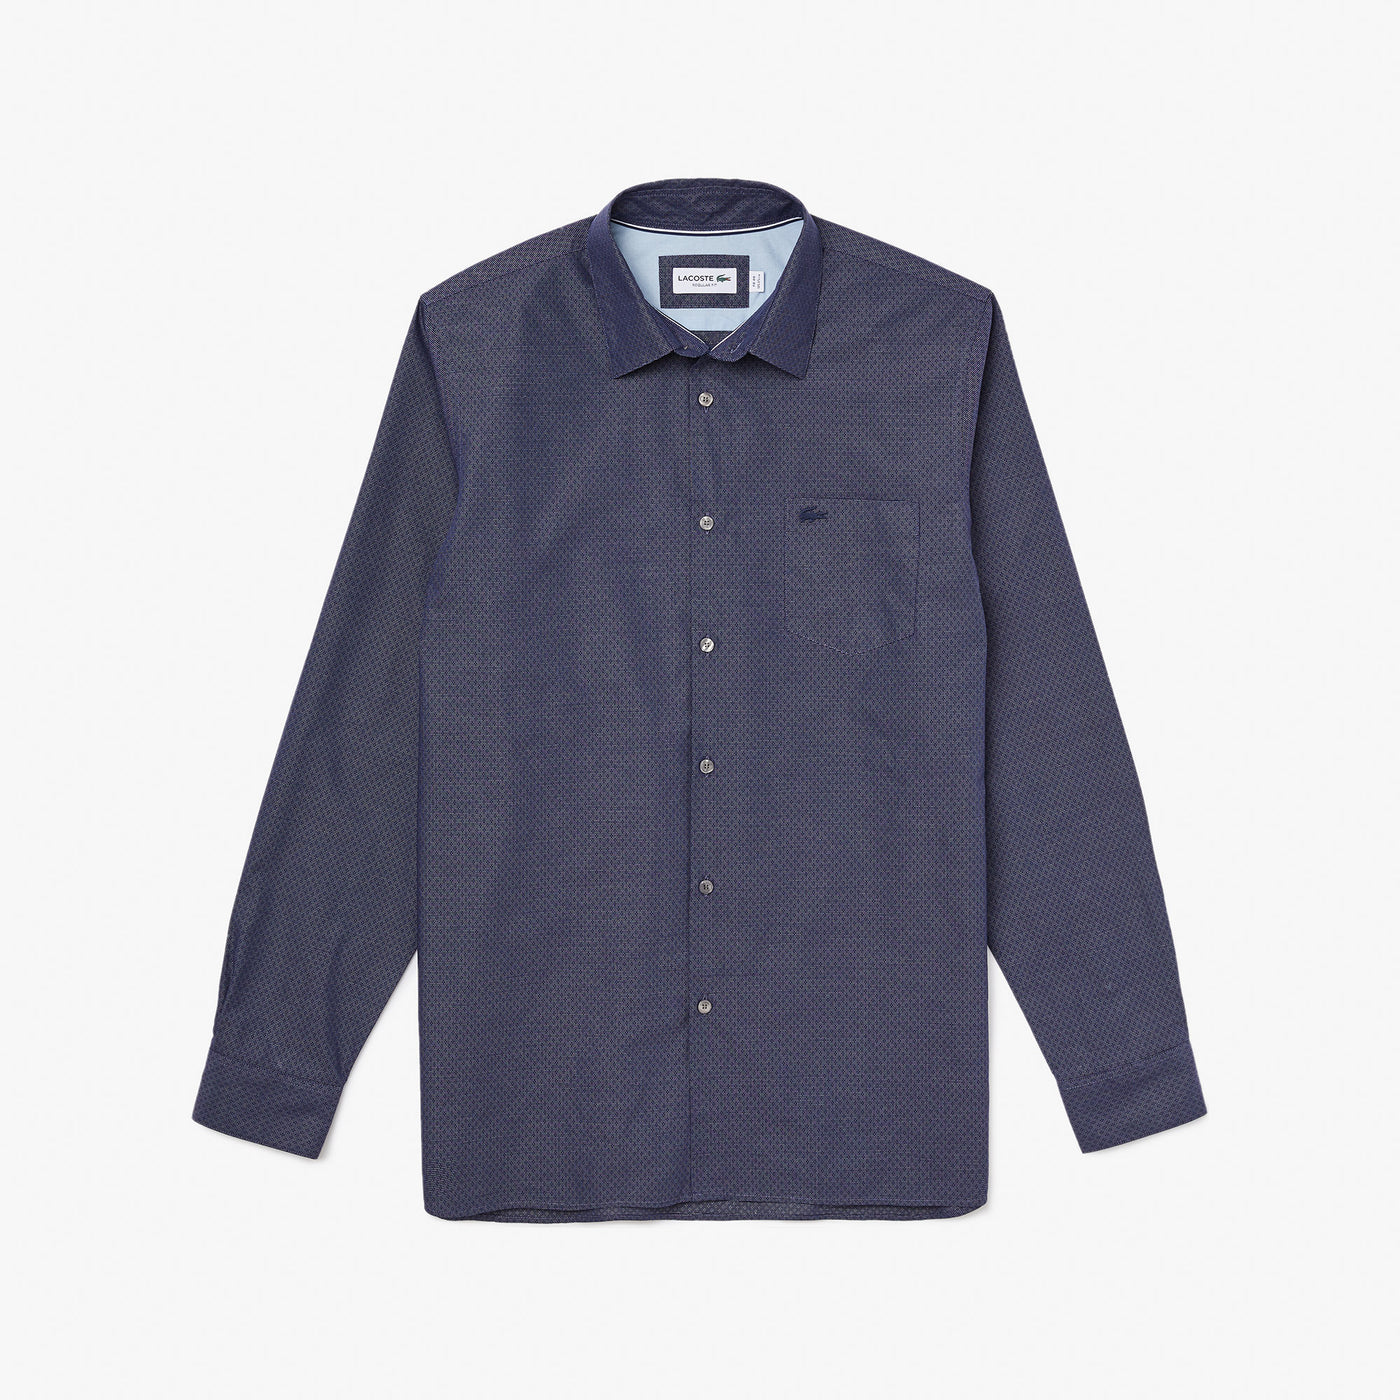 Shop The Latest Collection Of Outlet - Lacoste Men'S Textured Cotton Shirt - Ch6394 In Lebanon